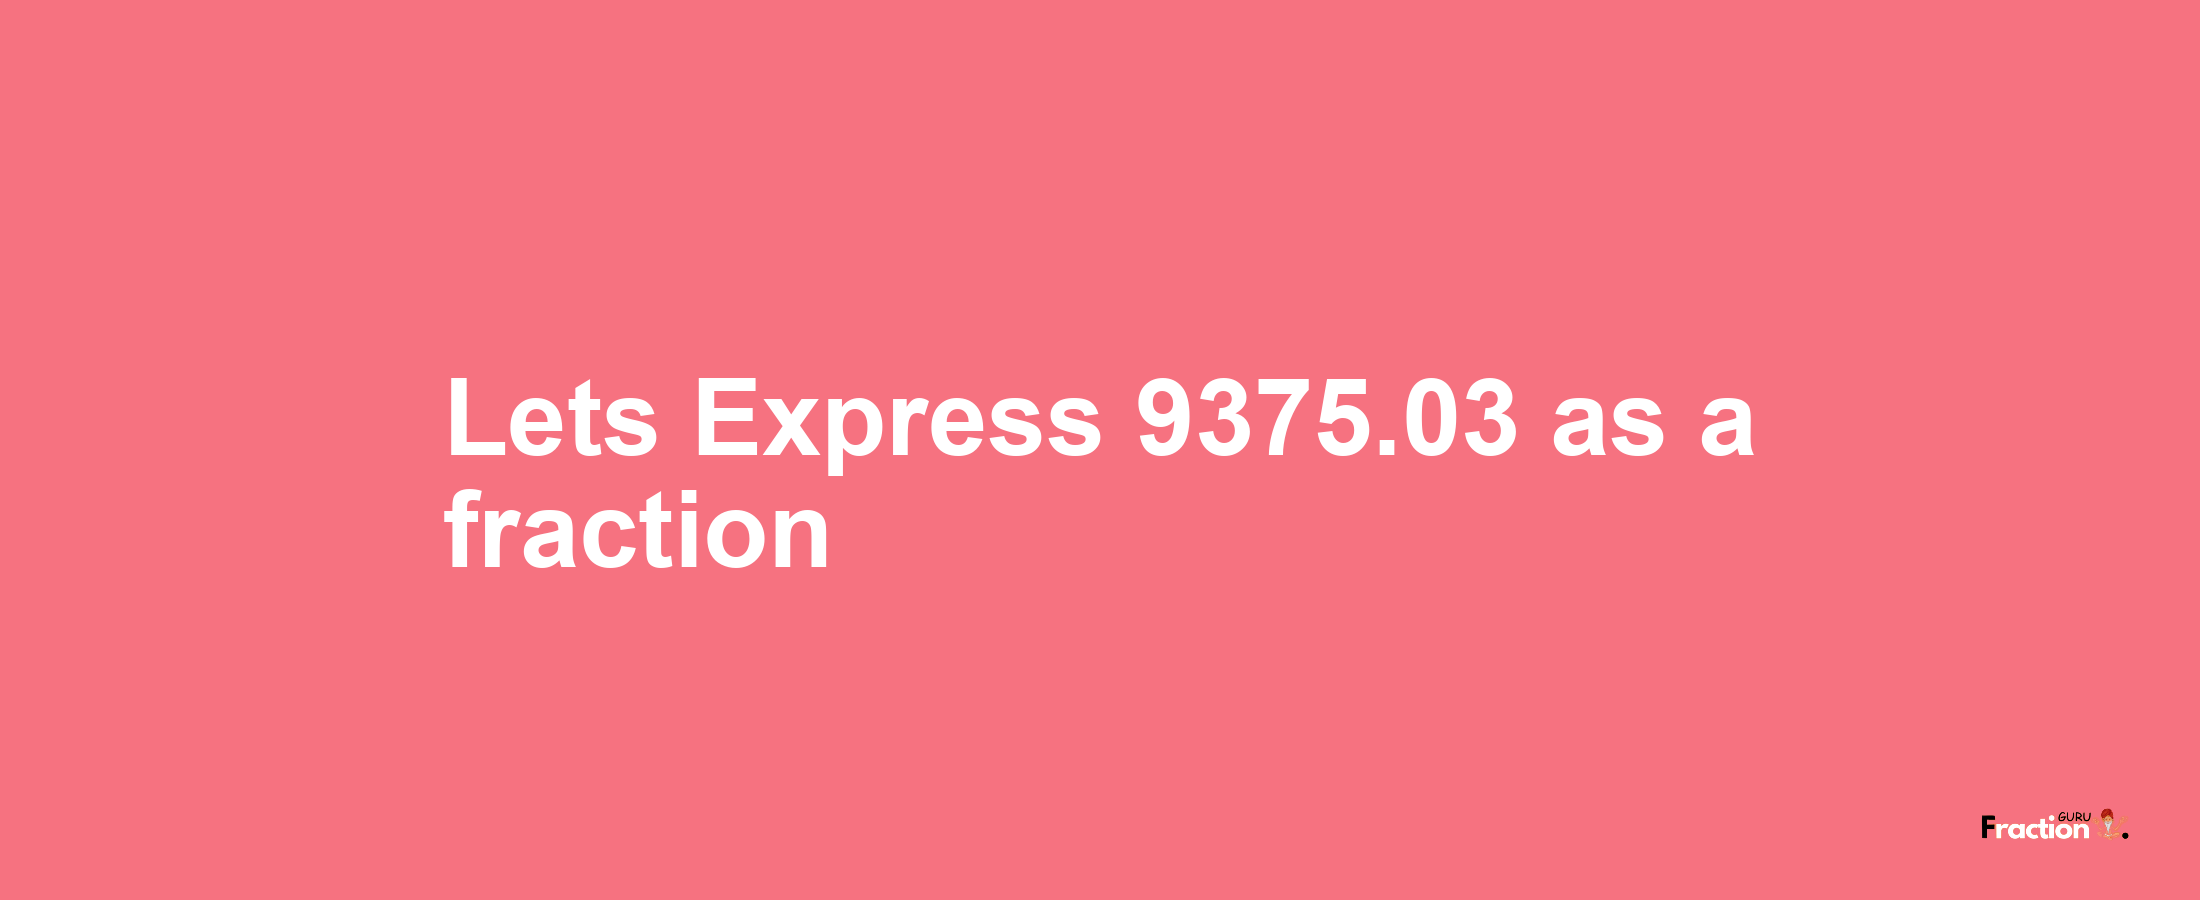 Lets Express 9375.03 as afraction